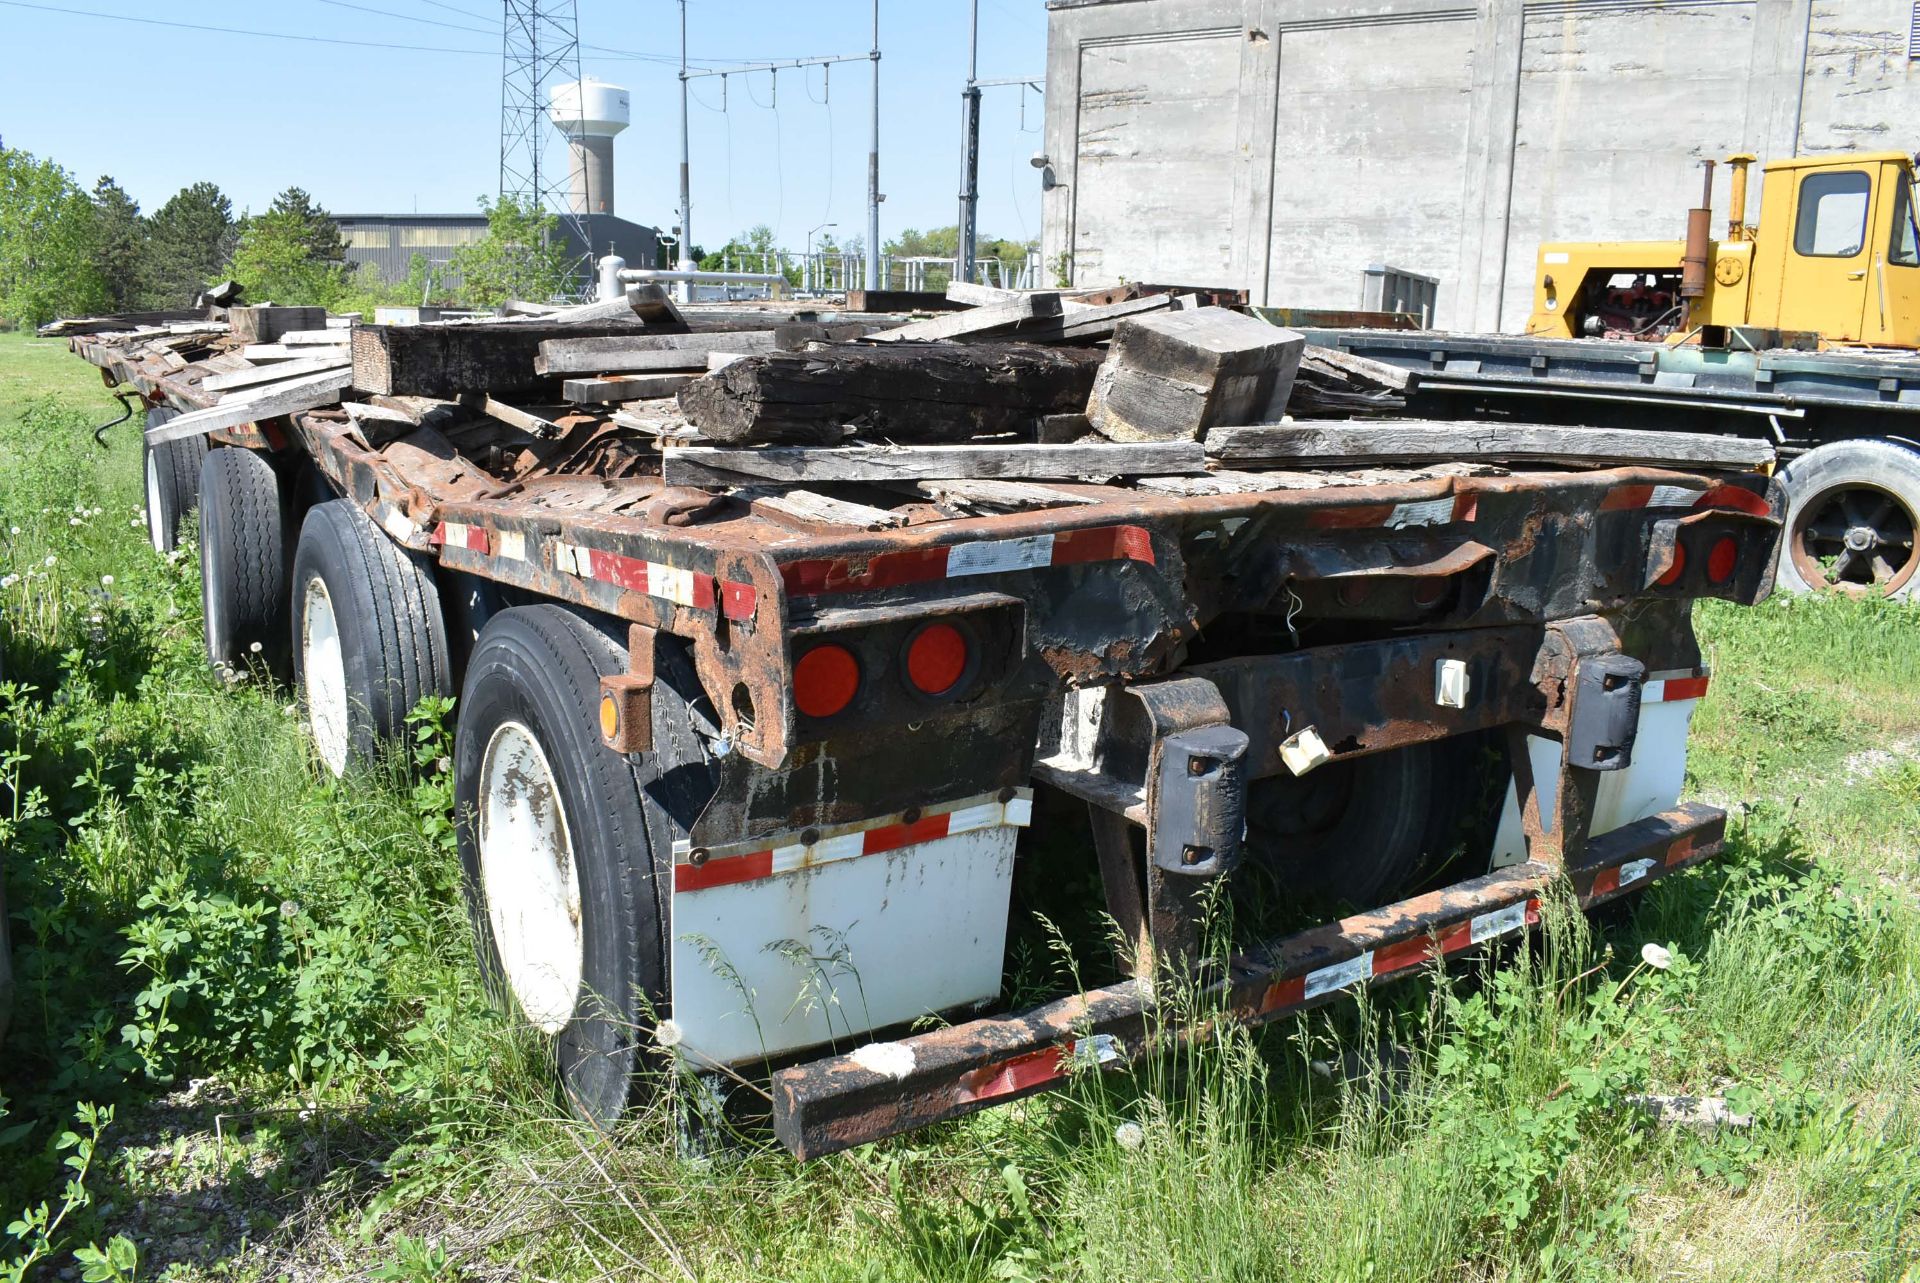 MFG. UNKNOWN 53' TRI-AXLE FLATBED TRAILER, VIN: N/A (NOT PLATED, NO REGISTRATION - PARTS TRAILER) [ - Image 4 of 4